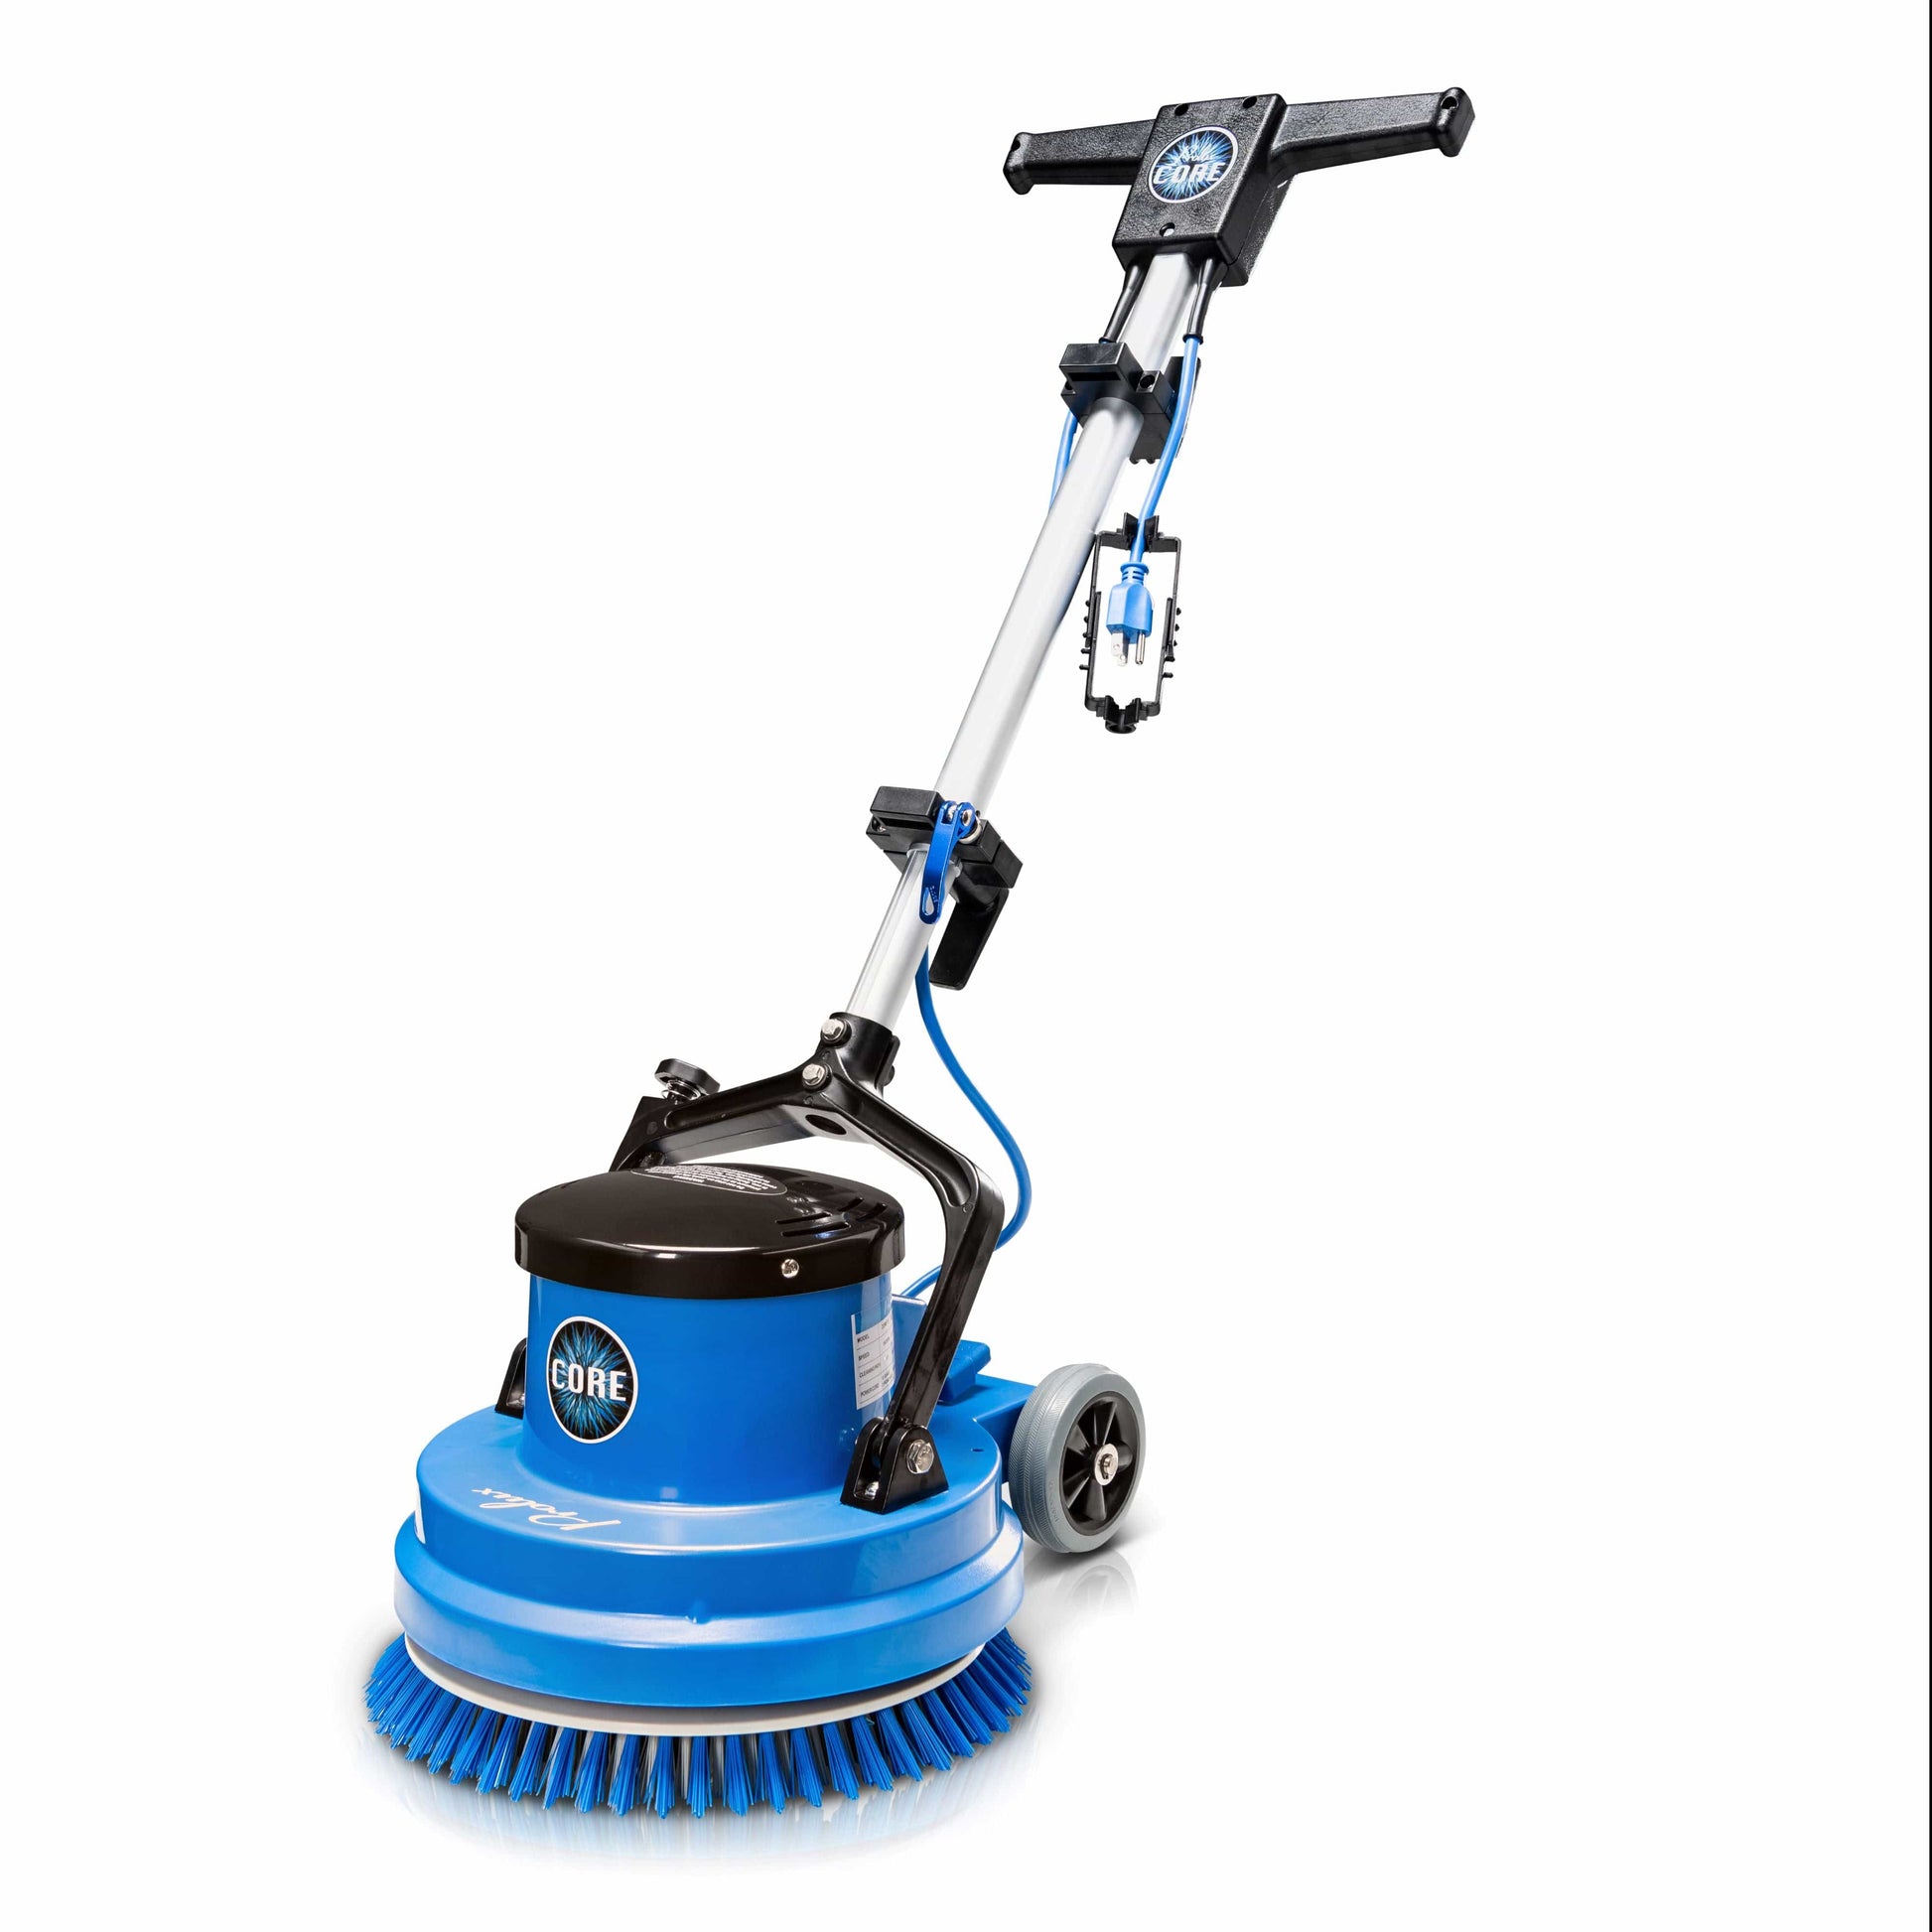 Demo Prolux Core 15 Floor Buffer/Polisher – Prolux Cleaners